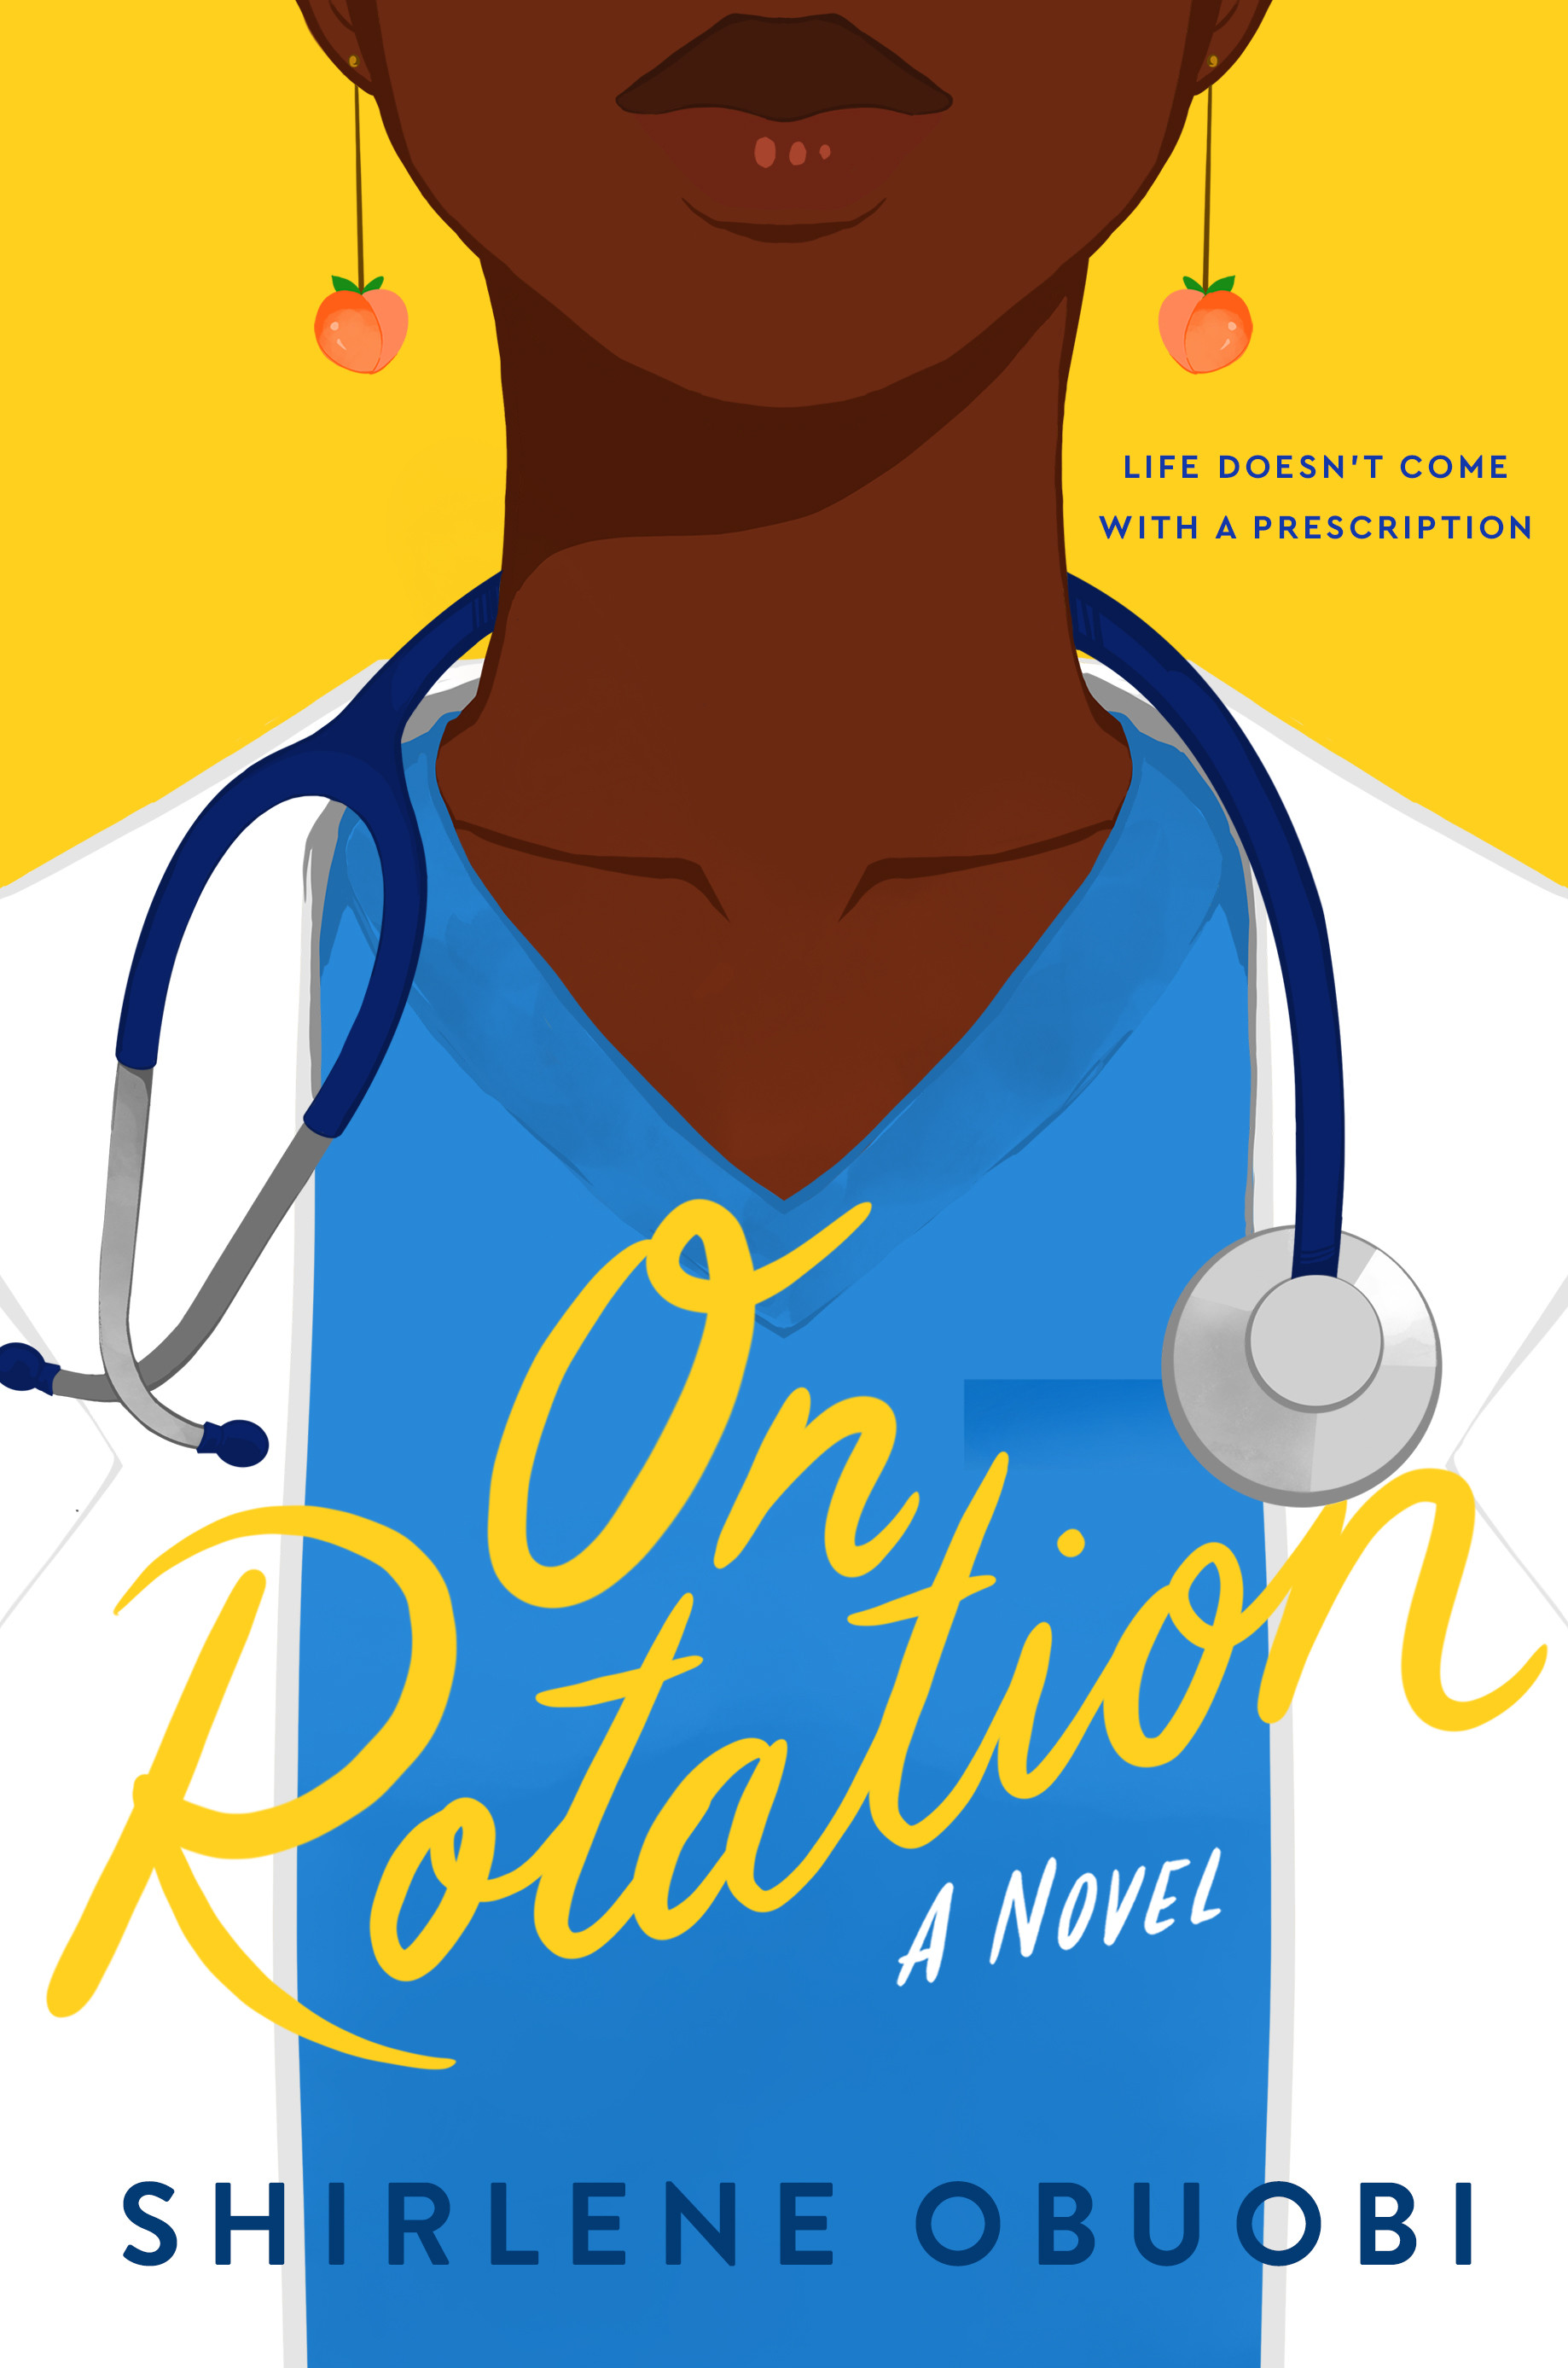 The cover of the novel On Rotation by Shirlene Obuobi with a subtitle that reads life doesn't come with a prescription